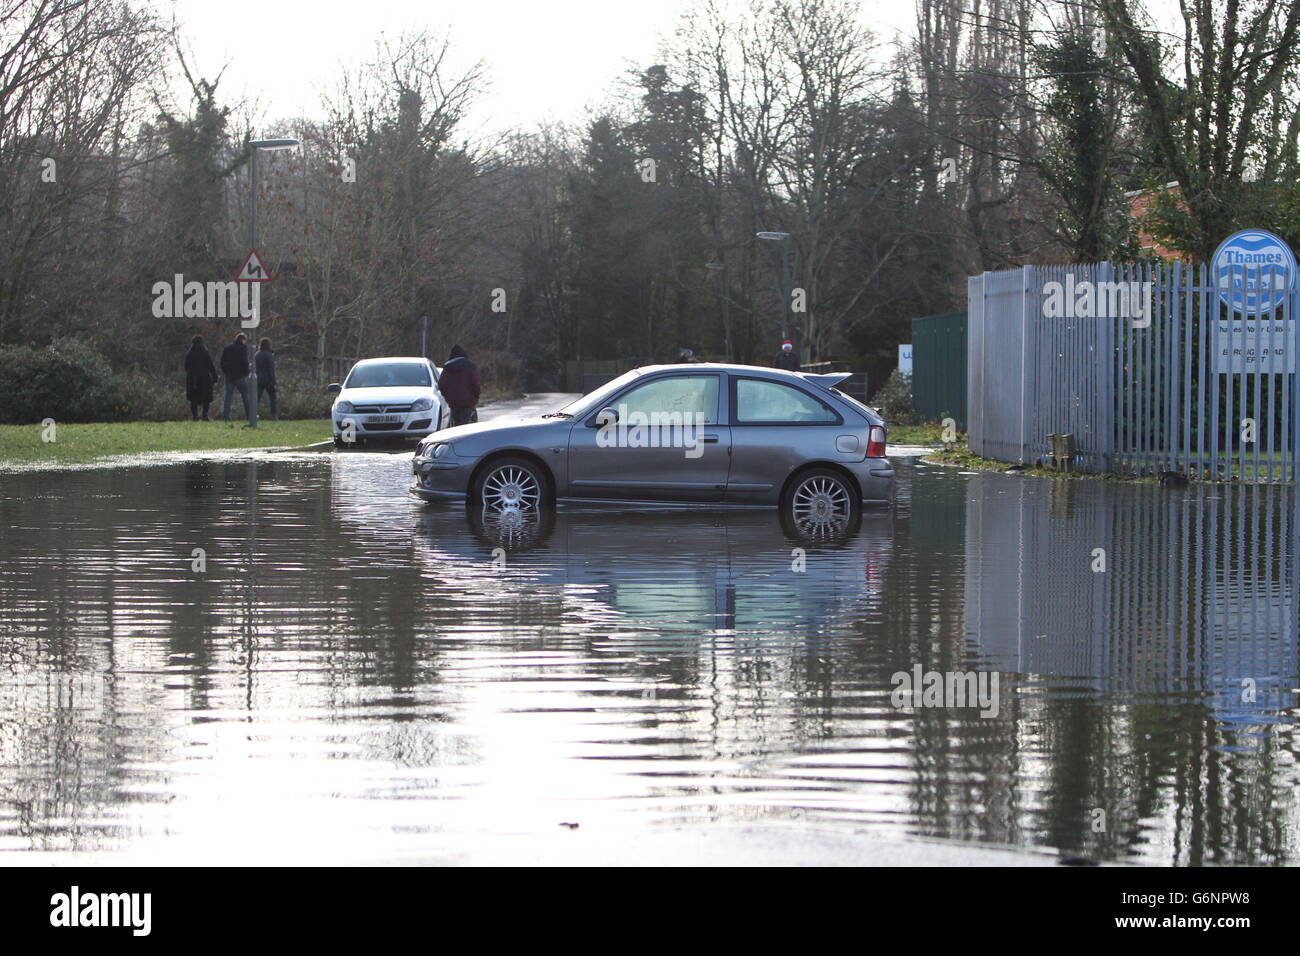 A stranded car in a flooded road in Godalming in Surrey after floods hit the area. Many people are facing a miserable Christmas Day in the wake of the stormy weather with thousands either evacuated from their homes or left without power. Stock Photo